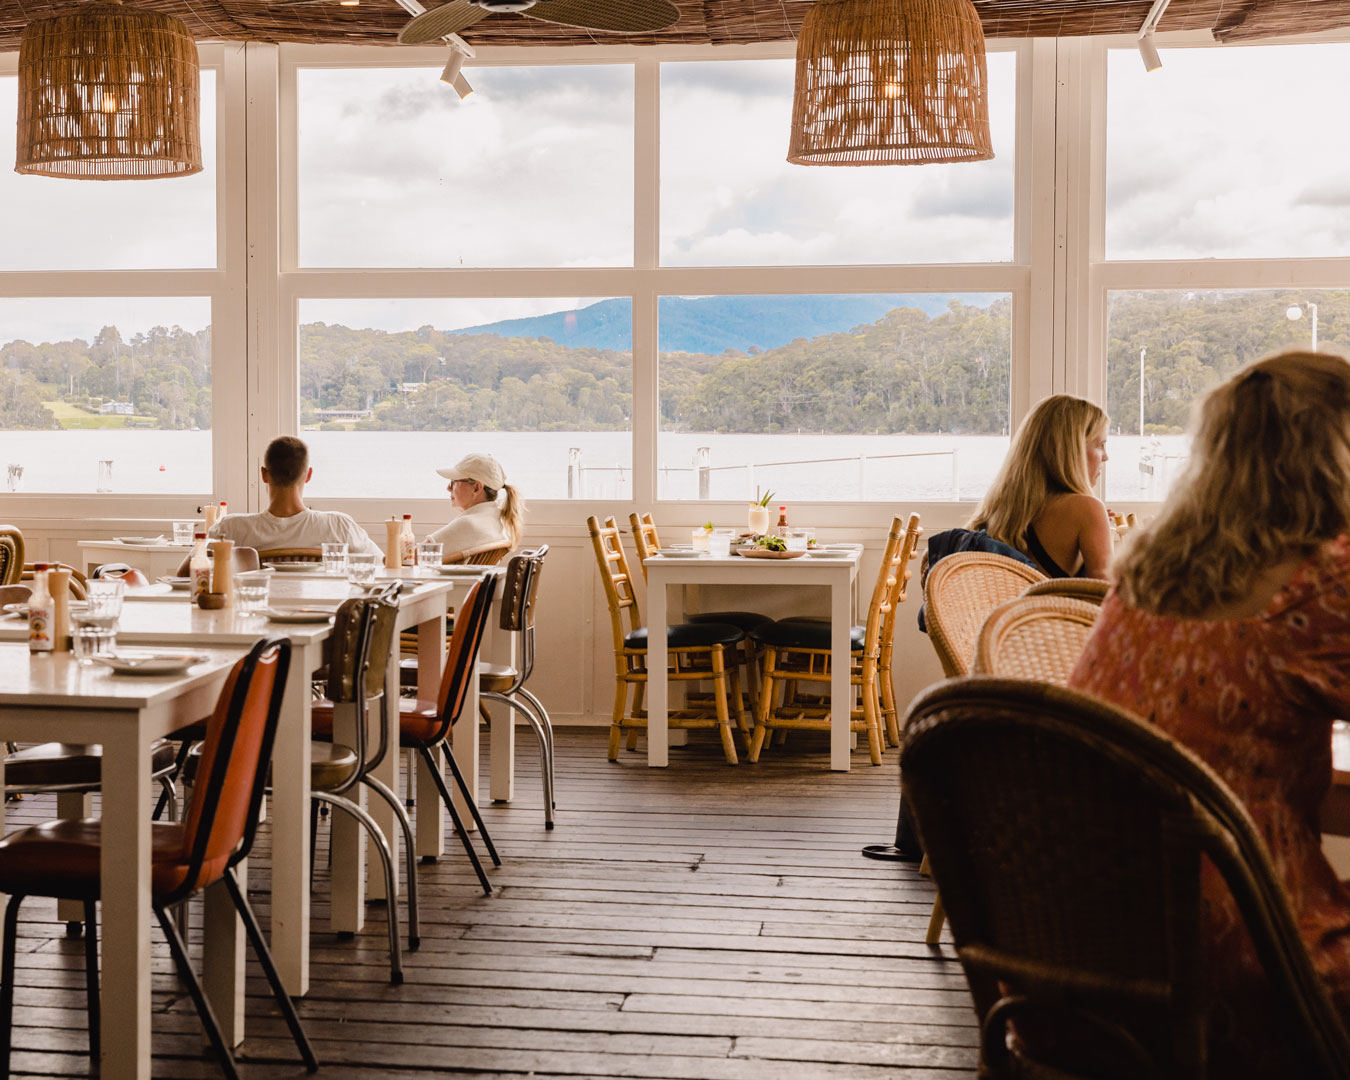 People in restaurant overlooking water and mountains